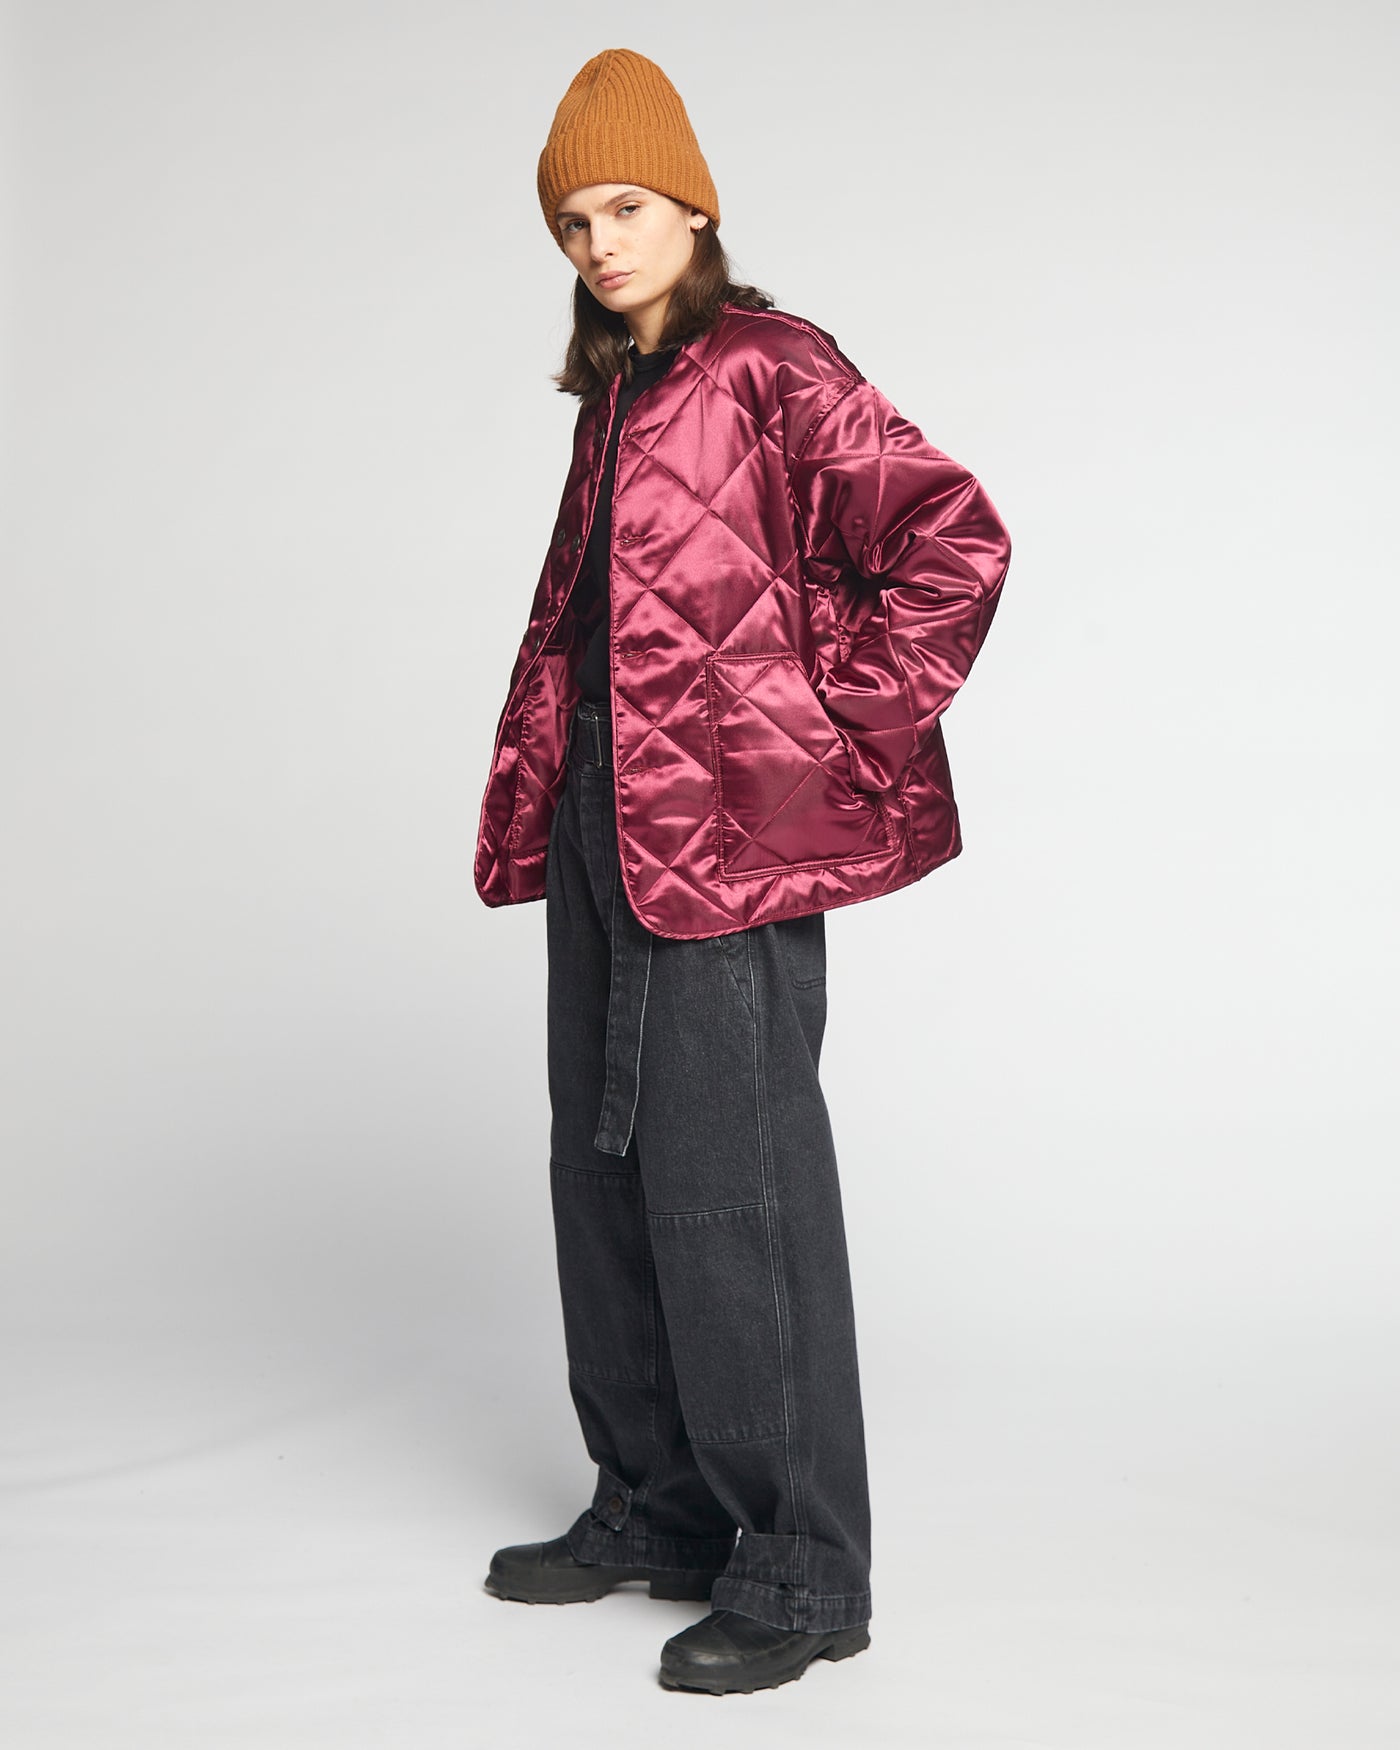 G.o.D Frostbite Diamond Quilted Nylon Jacket  Wine